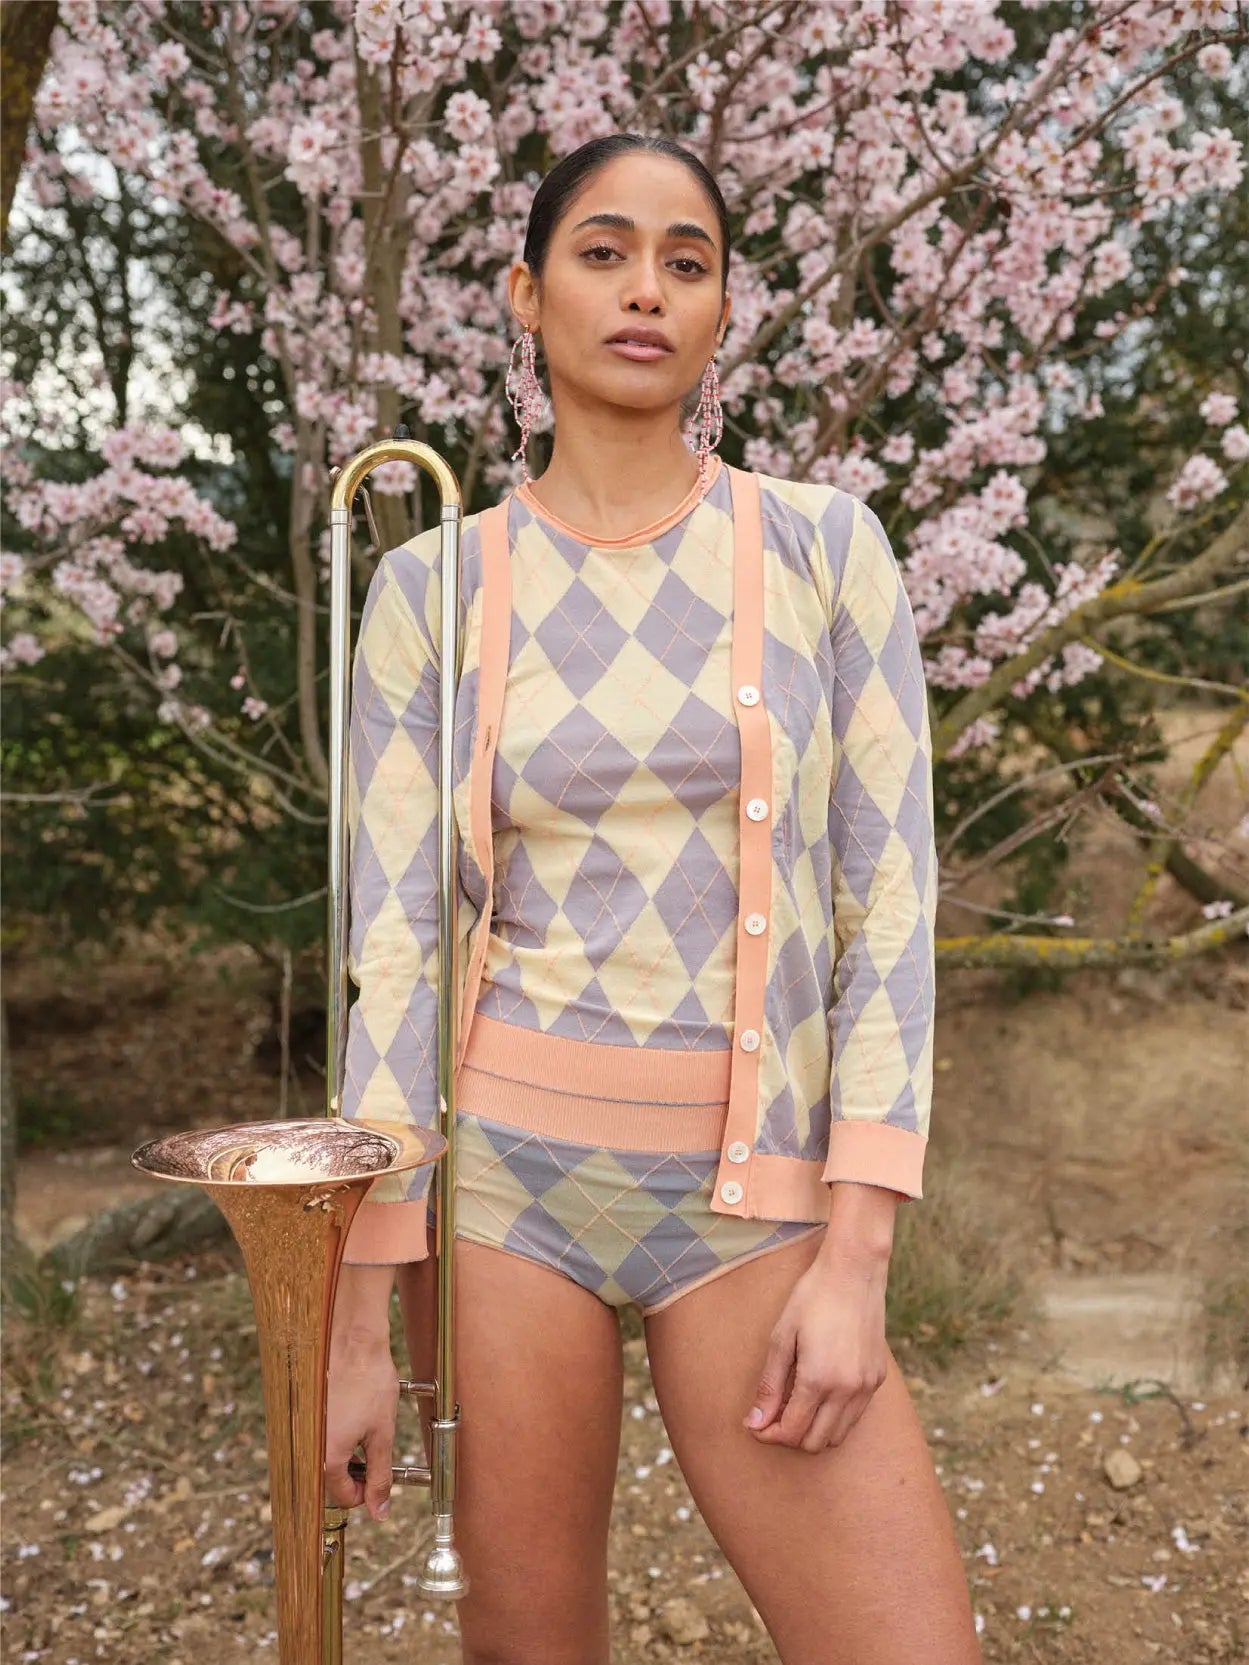 A short-sleeve sweater with a pastel argyle pattern featuring diamond shapes in light yellow and blue on a beige background. The Jes Sweater Peach by Bielo, available at Bassalstore in Barcelona, has light pink ribbed cuffs at the sleeves, neckline, and hem.